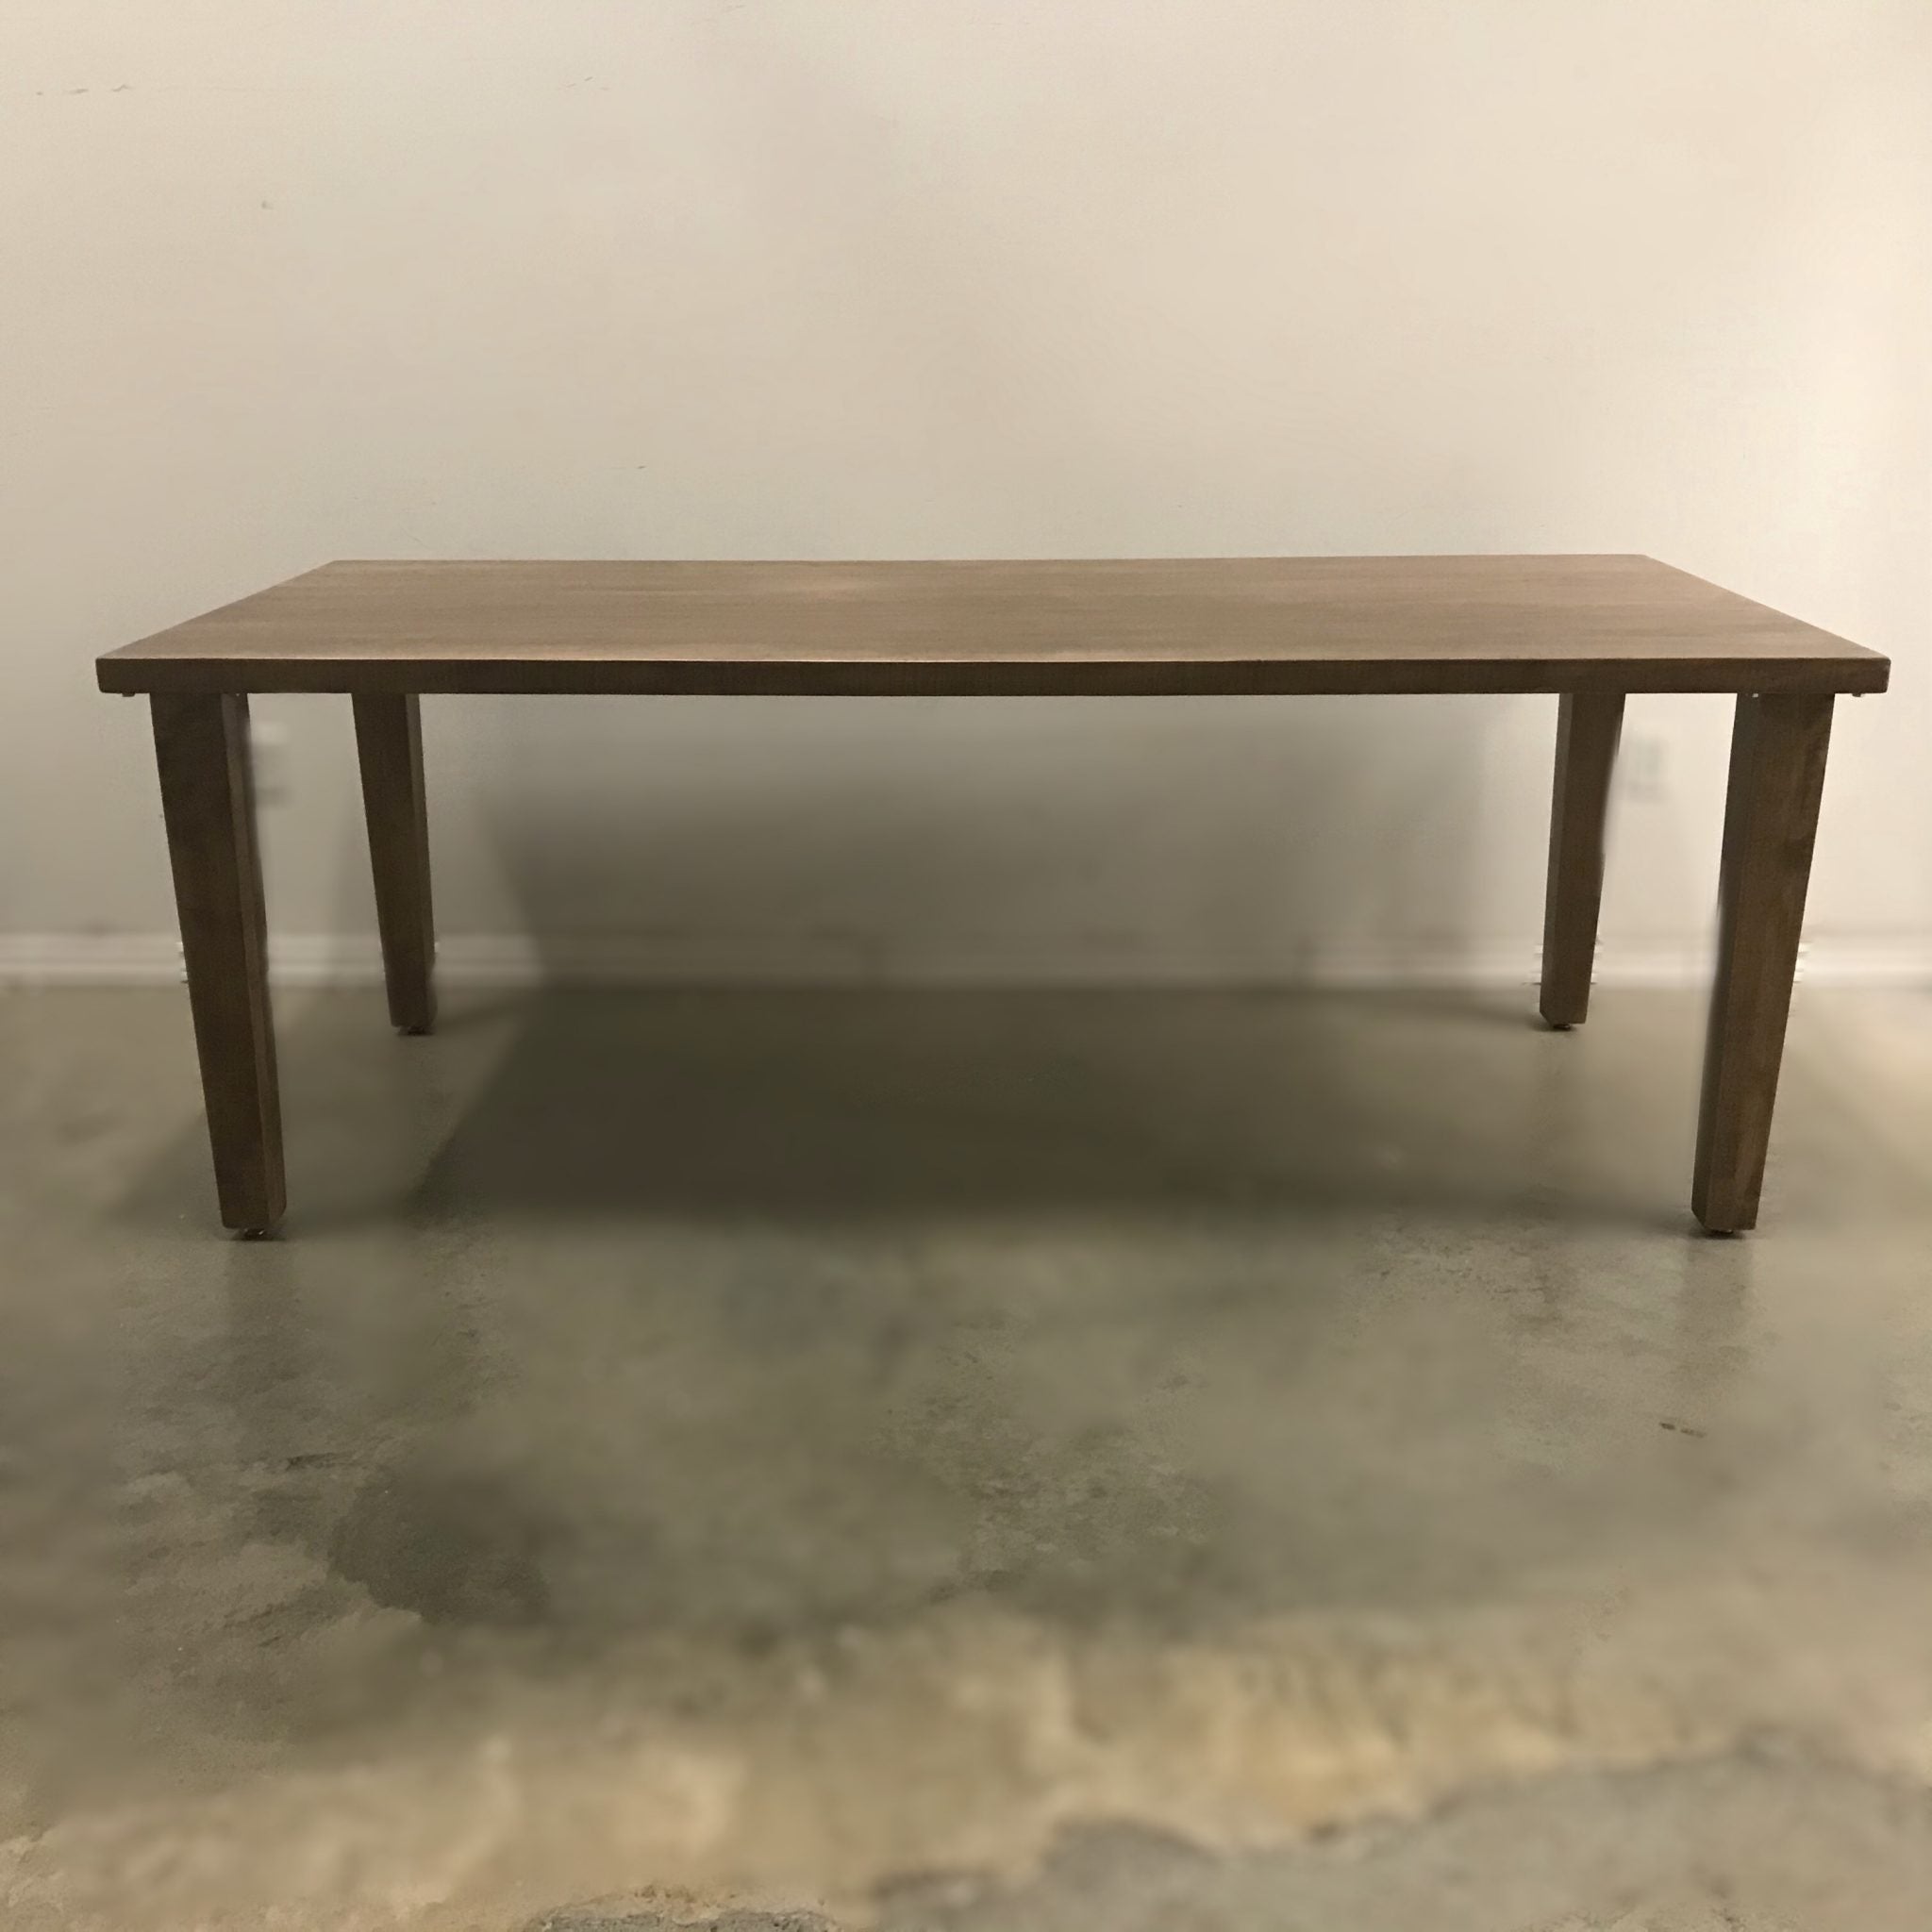 Melissa Solid Maple Dining Table